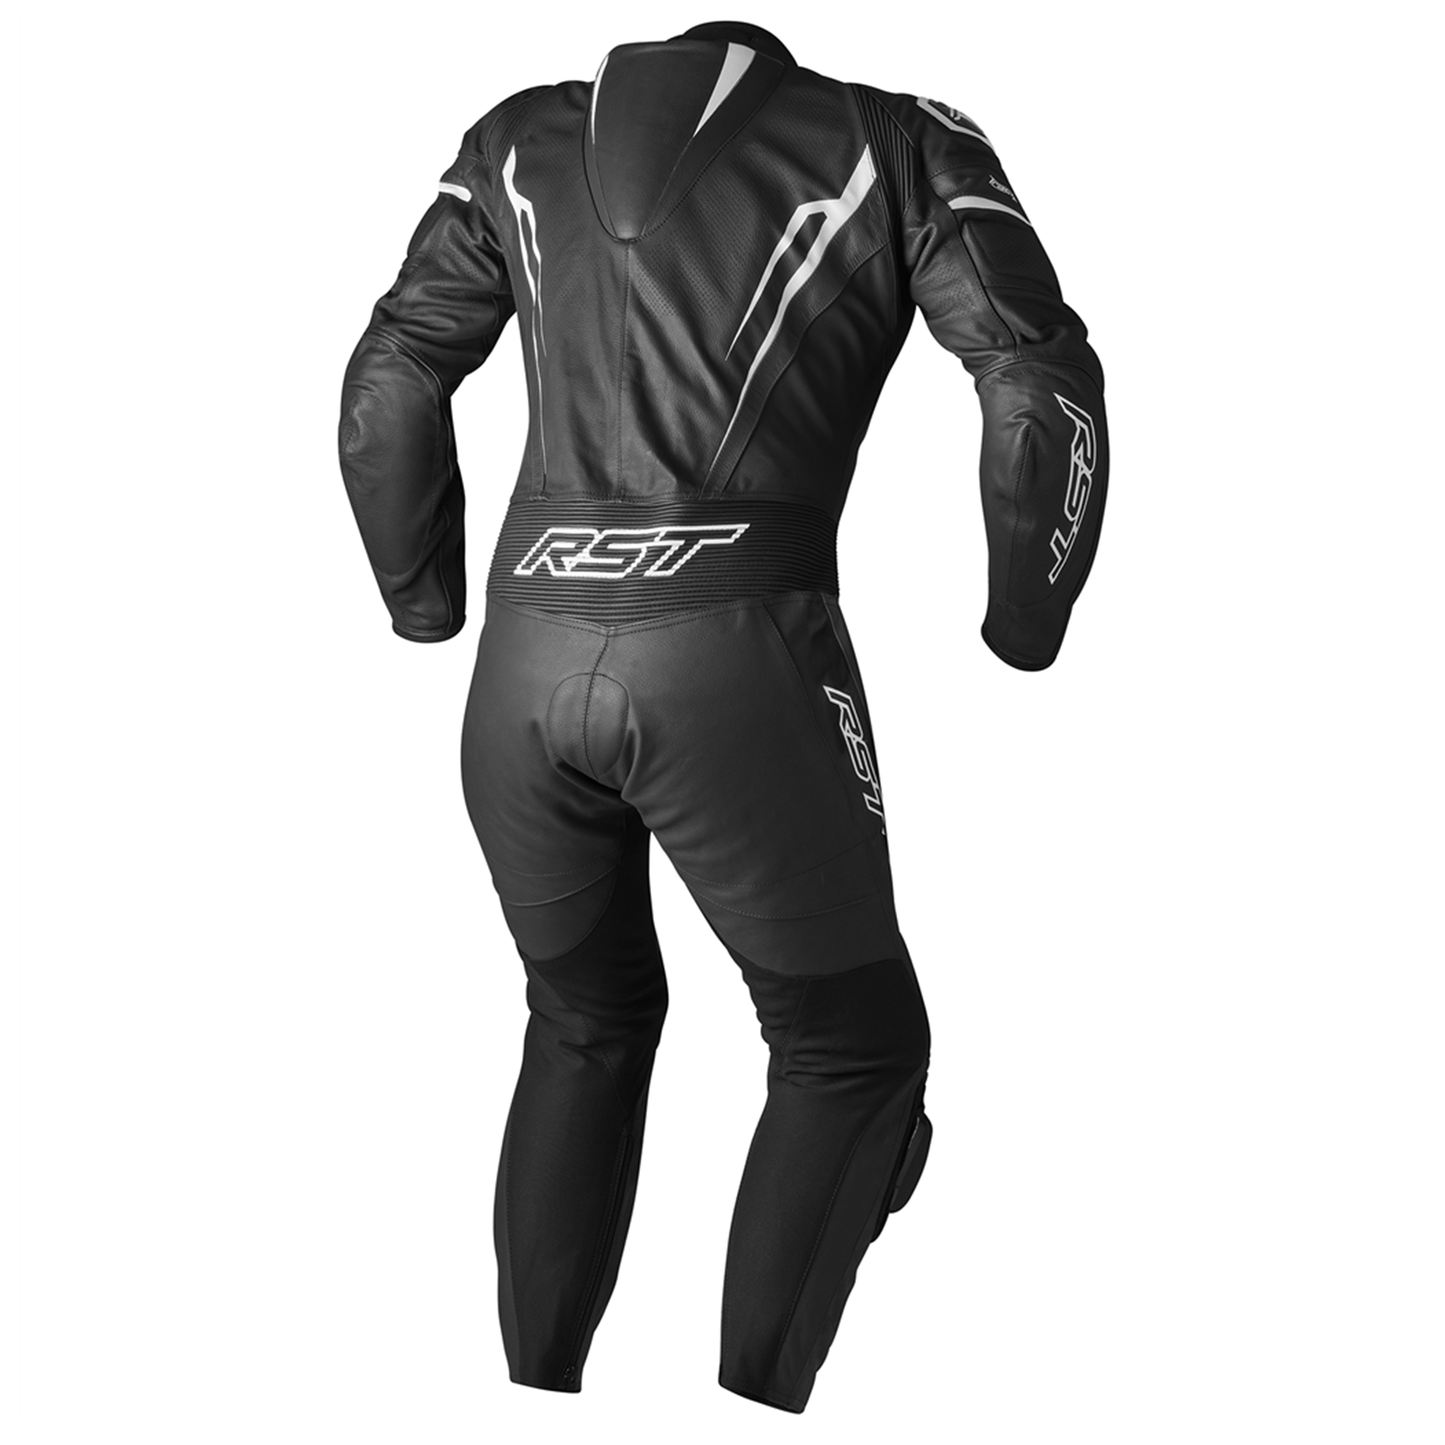 RST Tractech Evo 5 One Piece Leather Suit (CE) - Black/White/Black